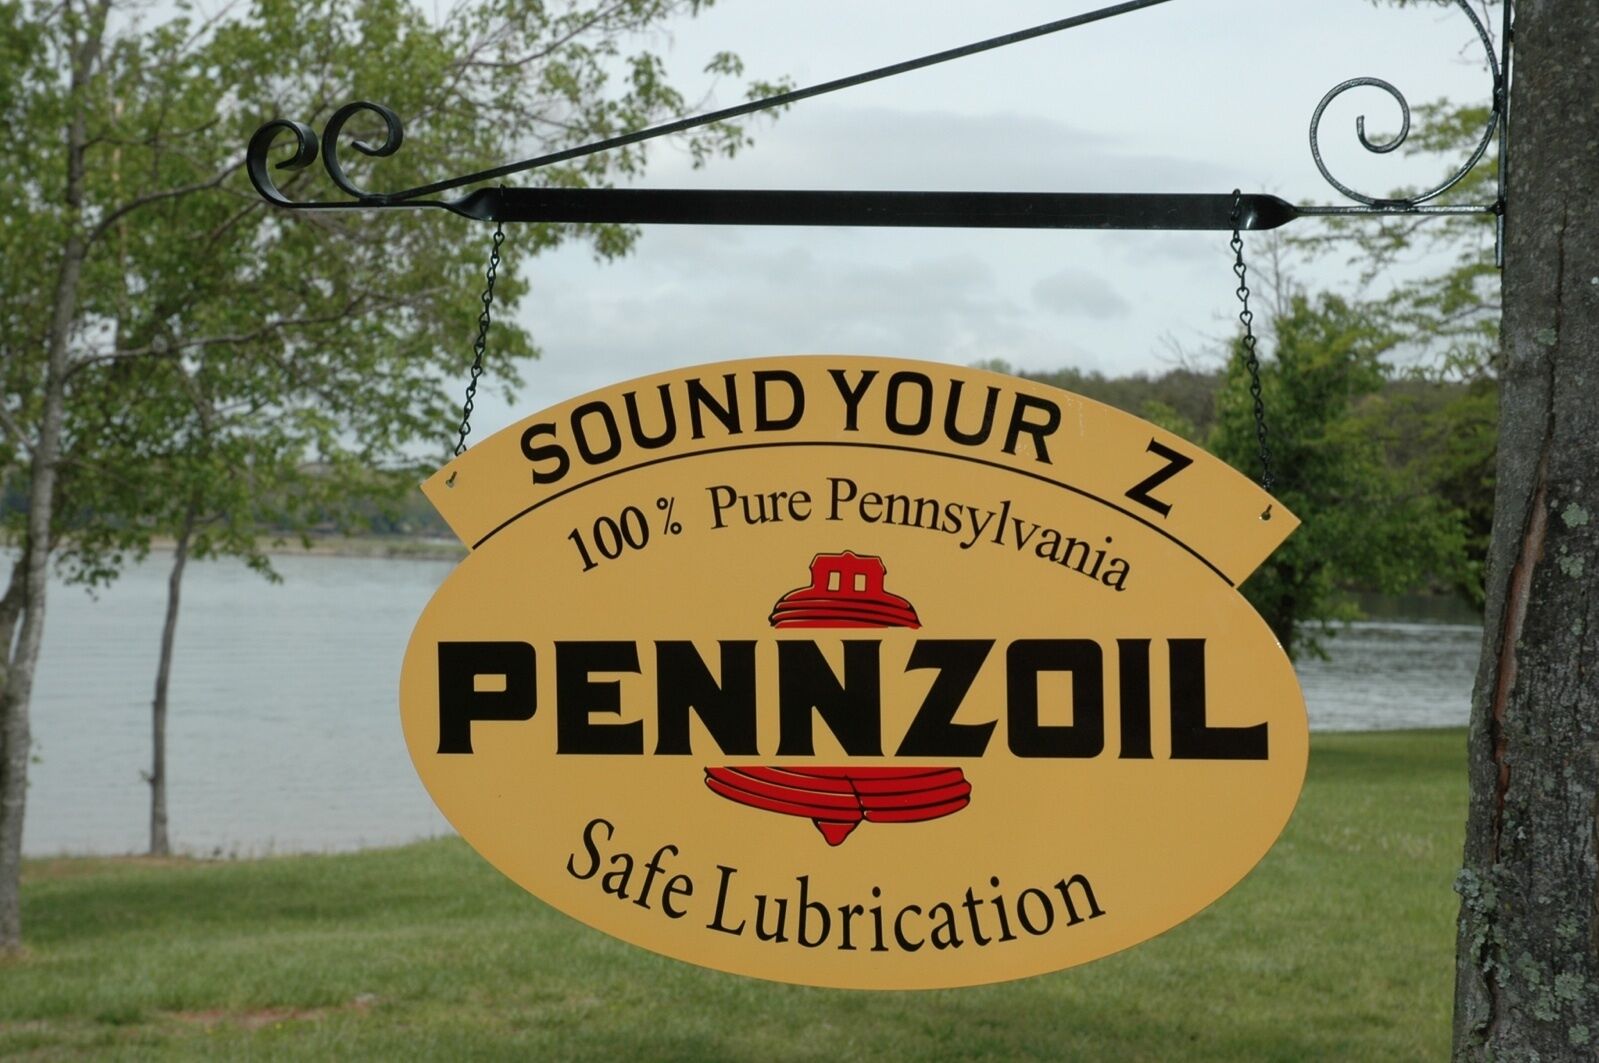 OLD STYLE PENNZOIL "SOUND YOUR Z" MOTOR OIL TWO-SIDED SWINGER SIGN MADE IN USA! Без бренда